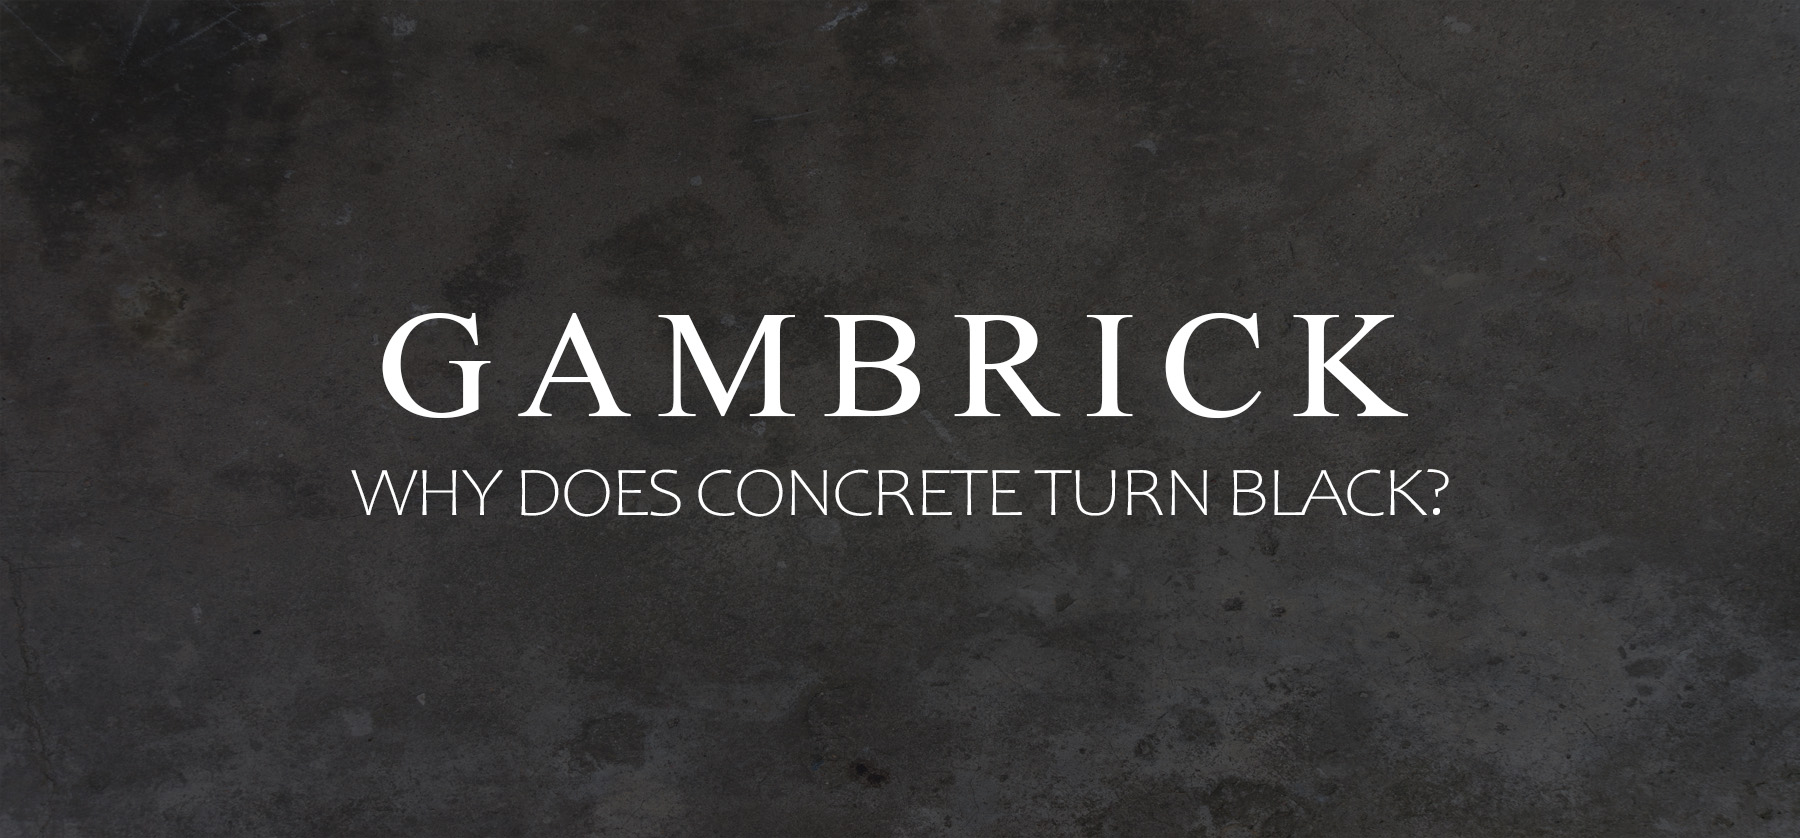 why does concrete turn black banner pic